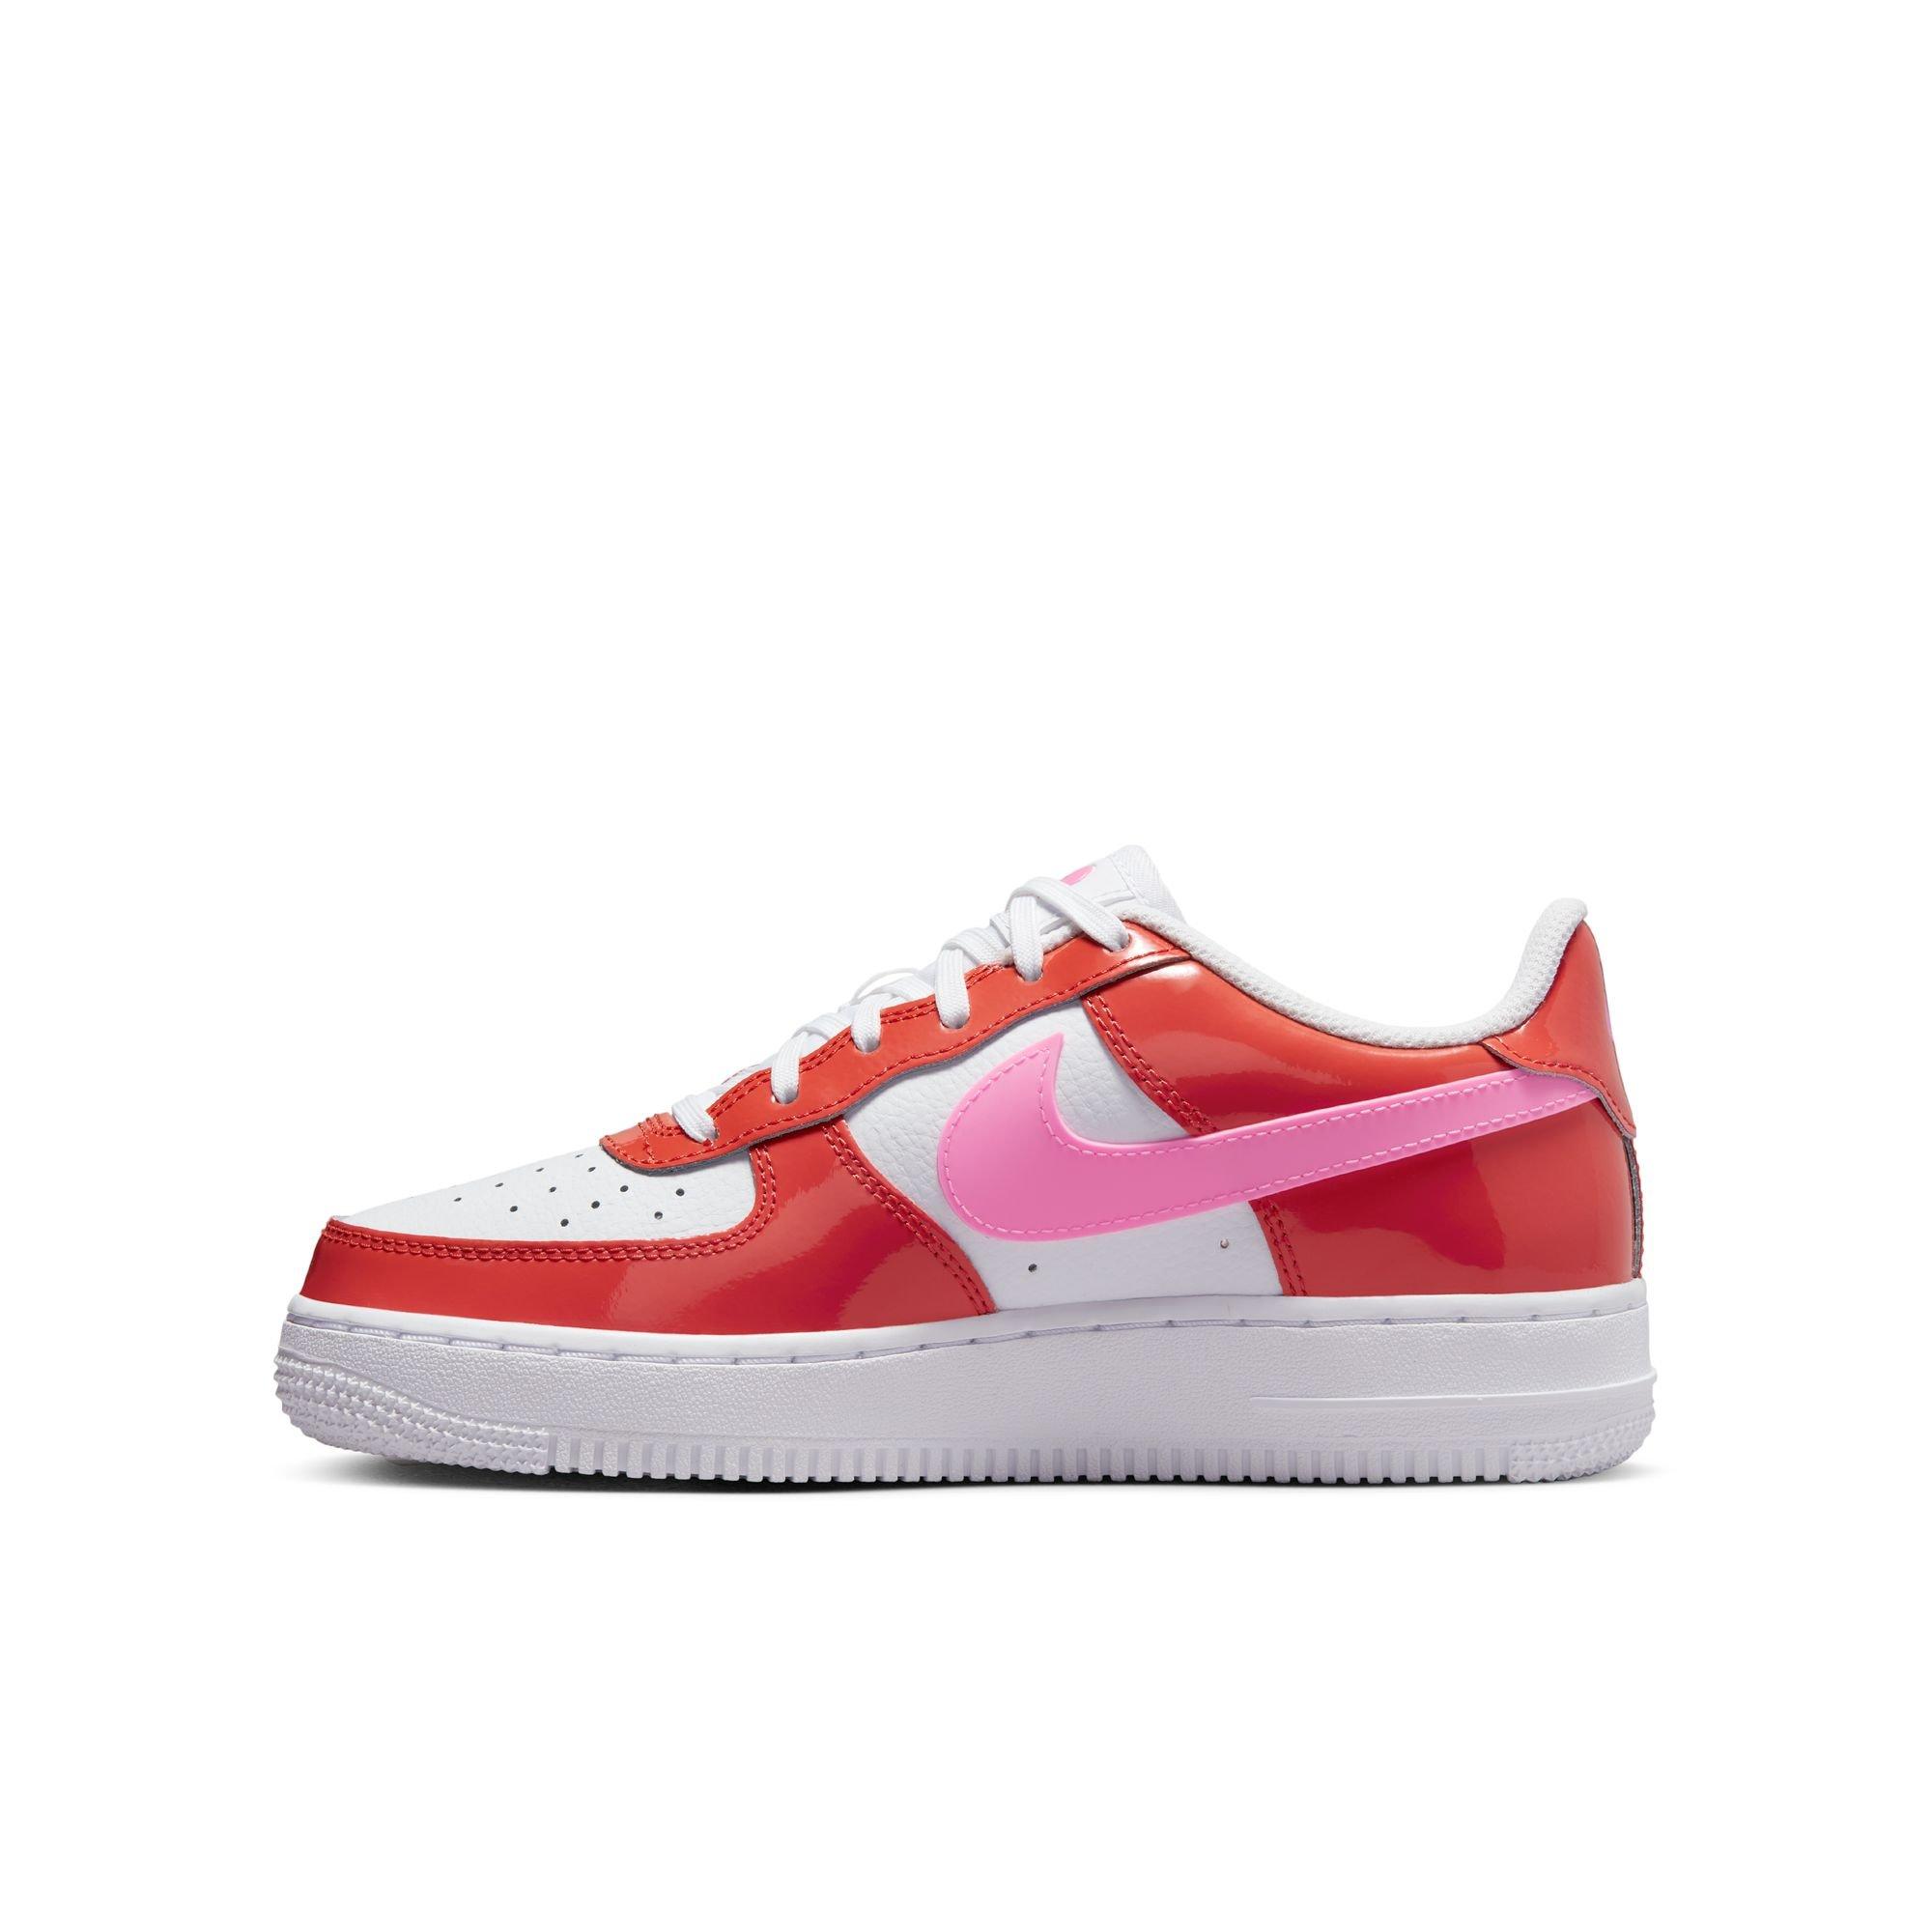 Nike Air Force 1 Low '07 White/Picante Red Men's Shoe - Hibbett